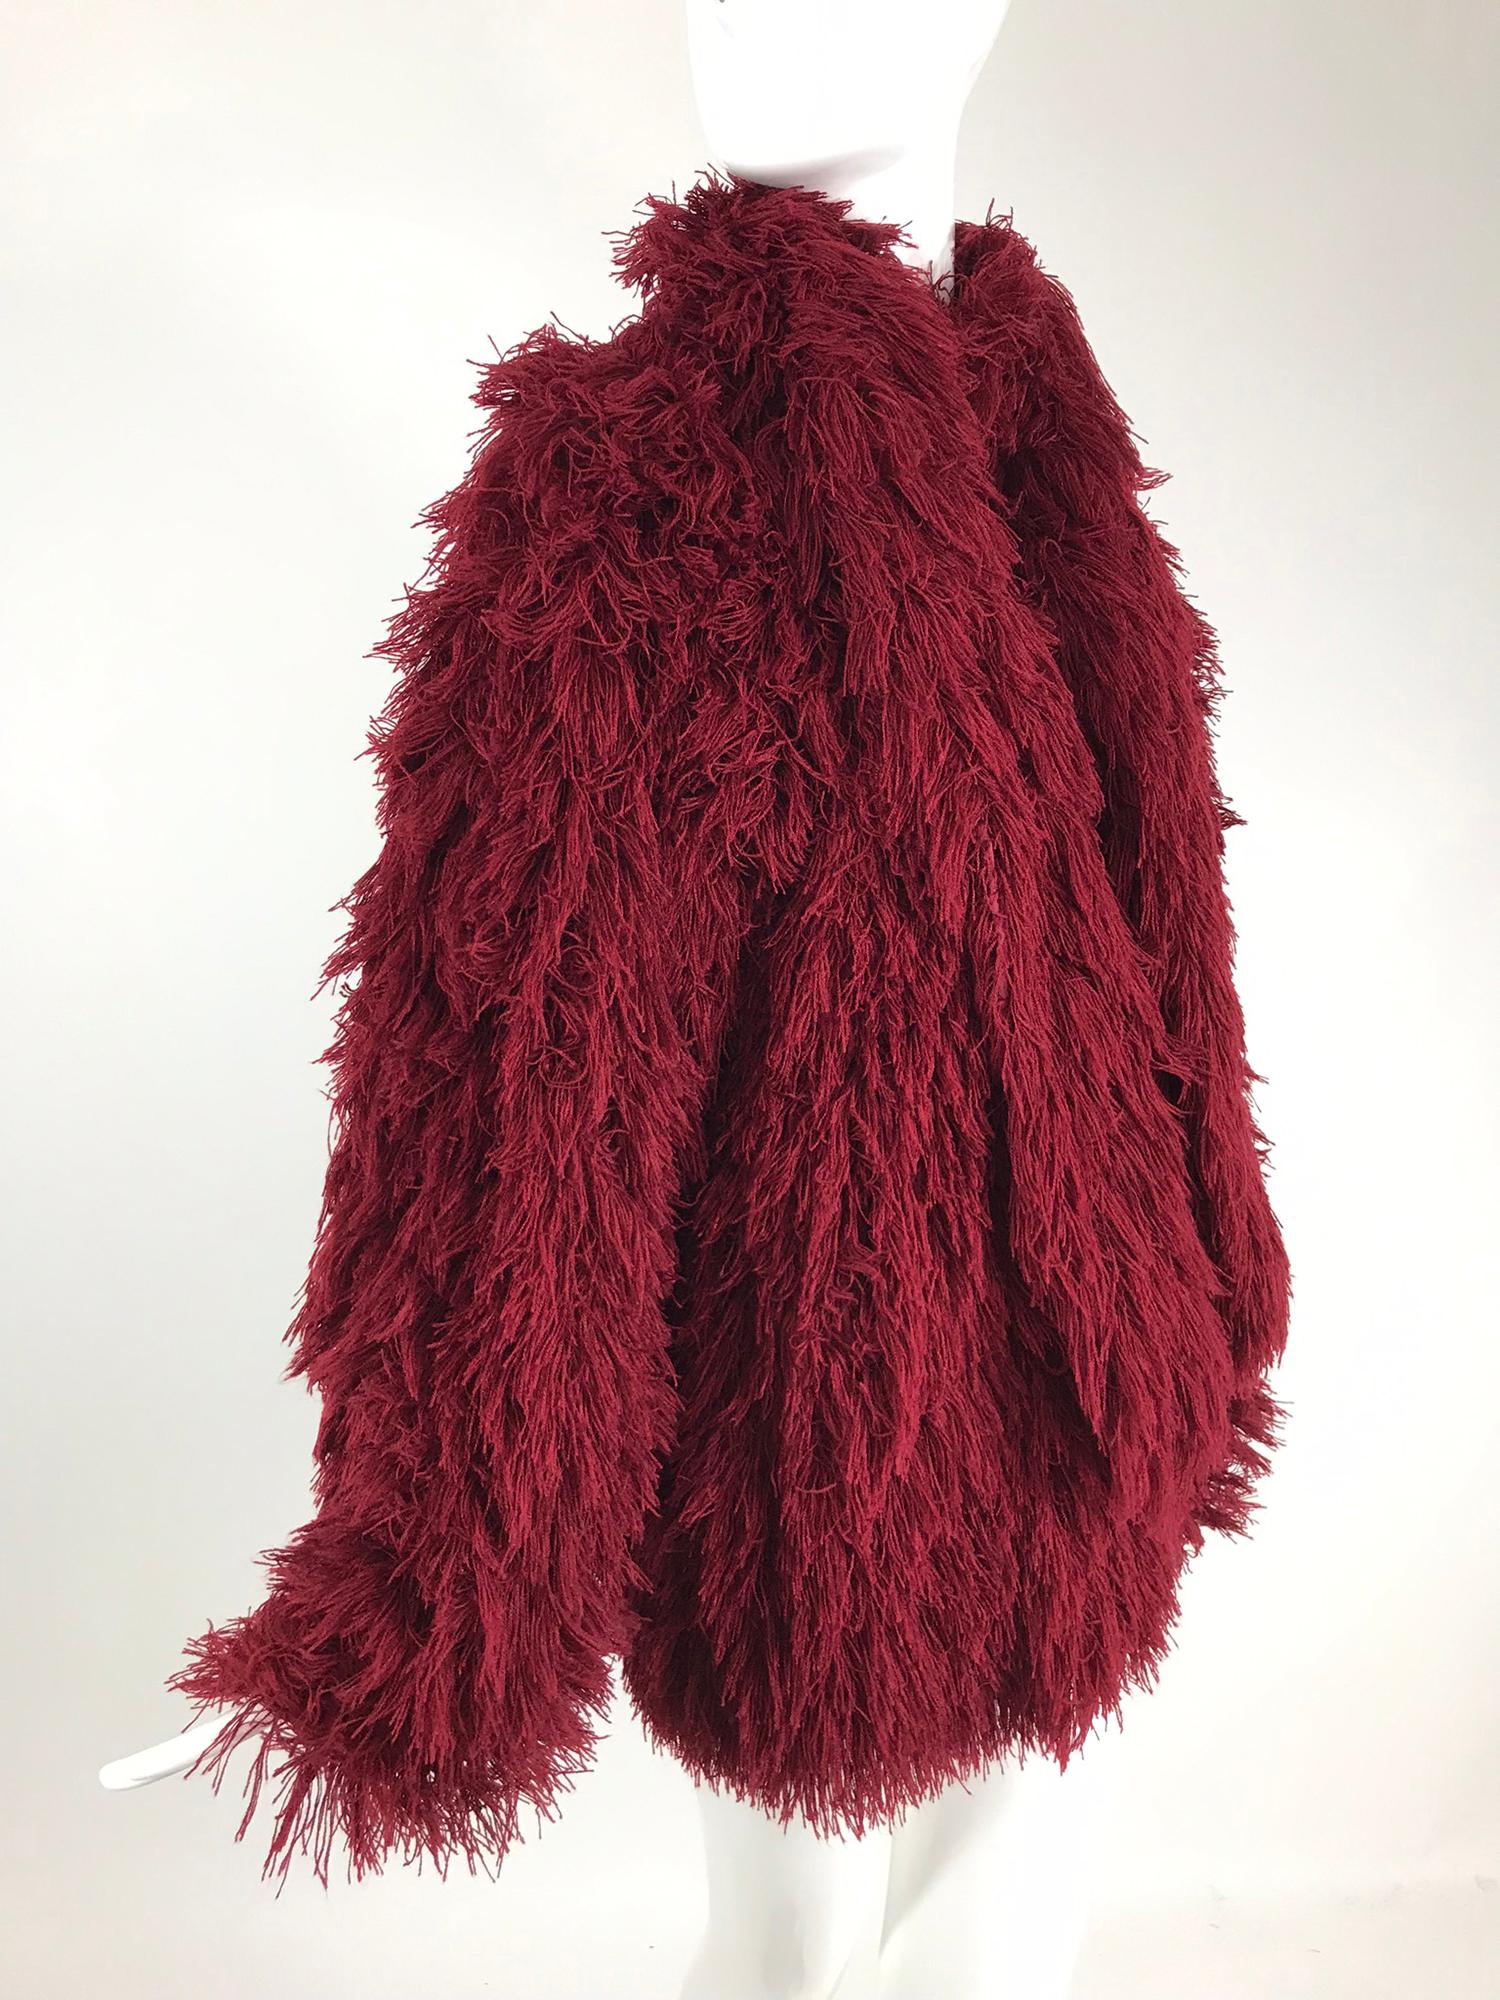 Red Arissa France Burgundy Faux Fur Jacket and Scarf 1980s